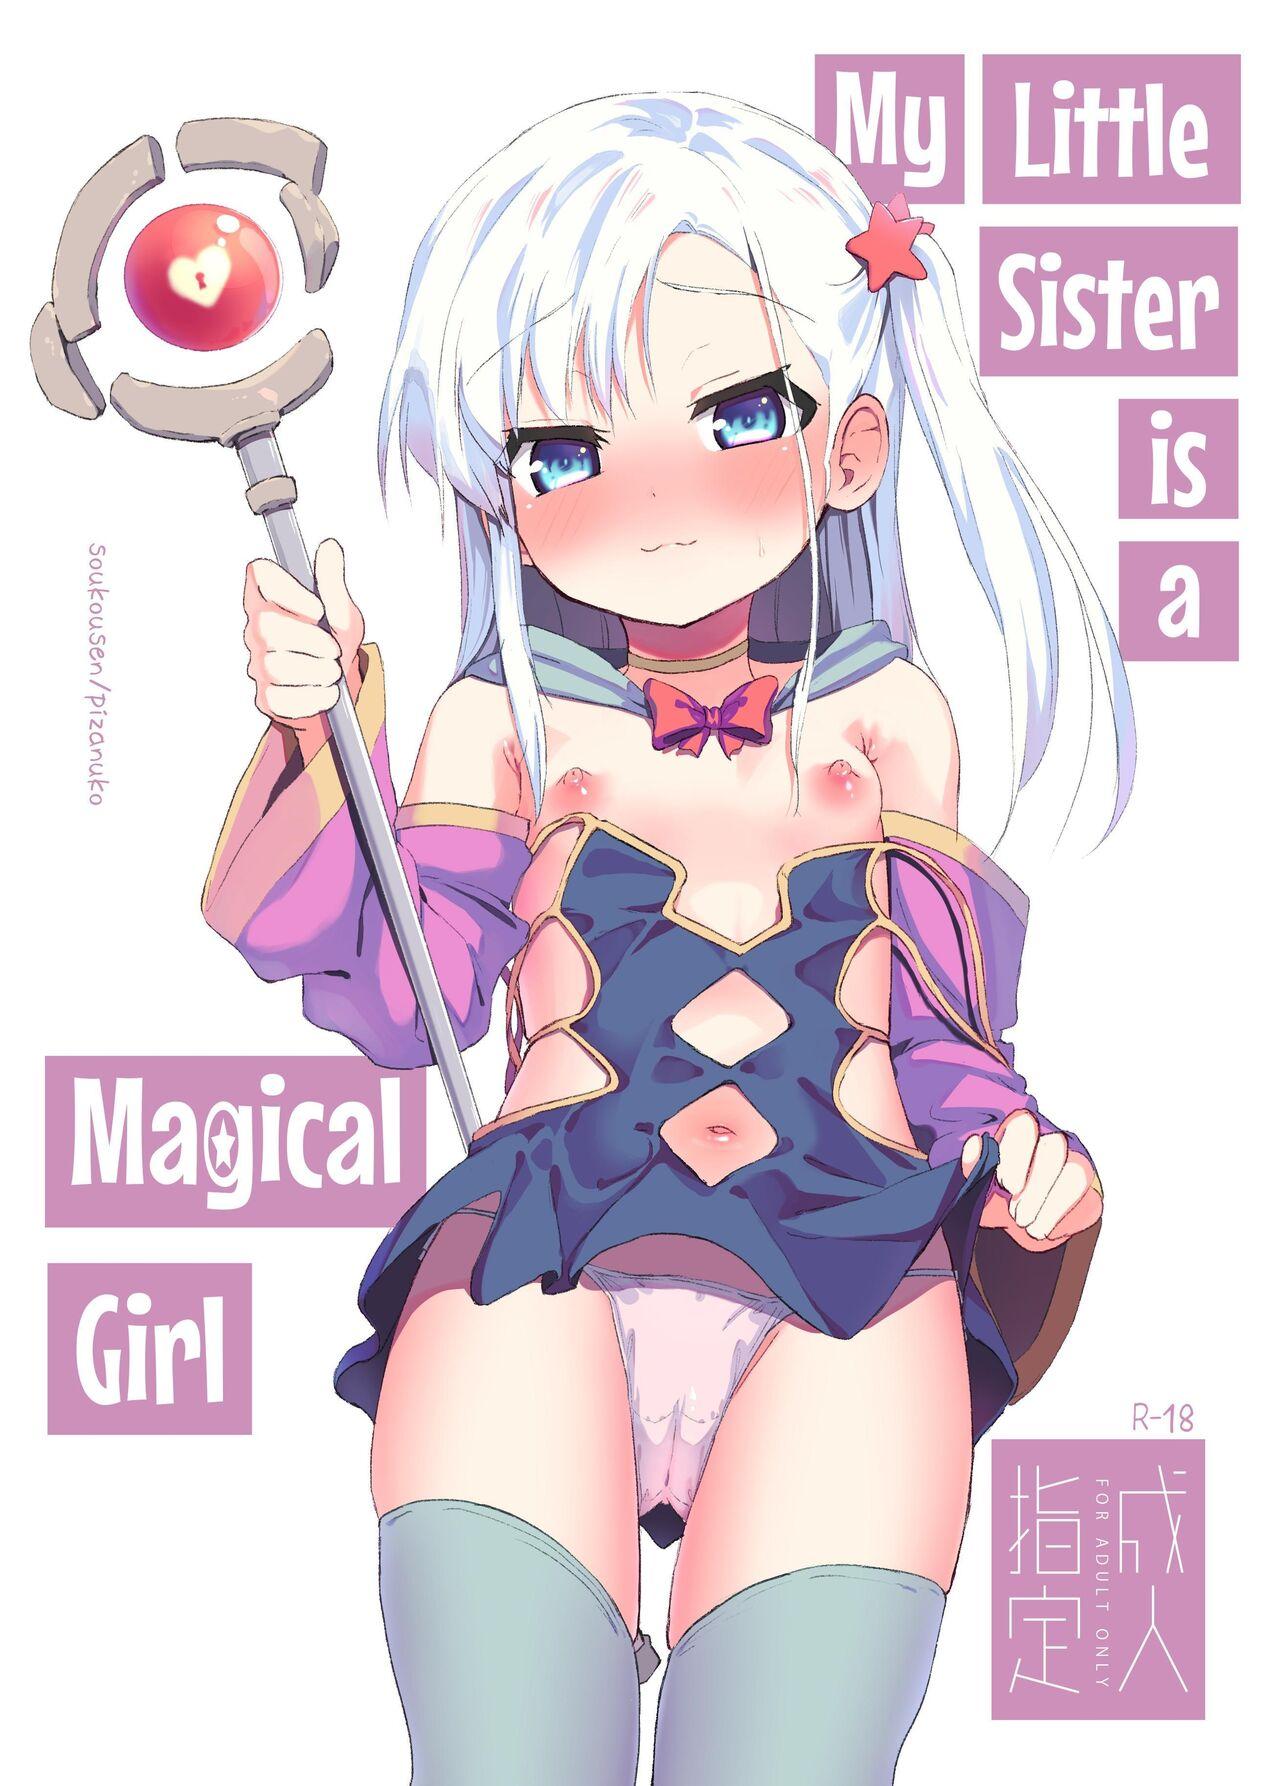 Audition Imouto wa Mahou Shoujo | My Little Sister is a Magical Girl - Original Sis - Picture 1